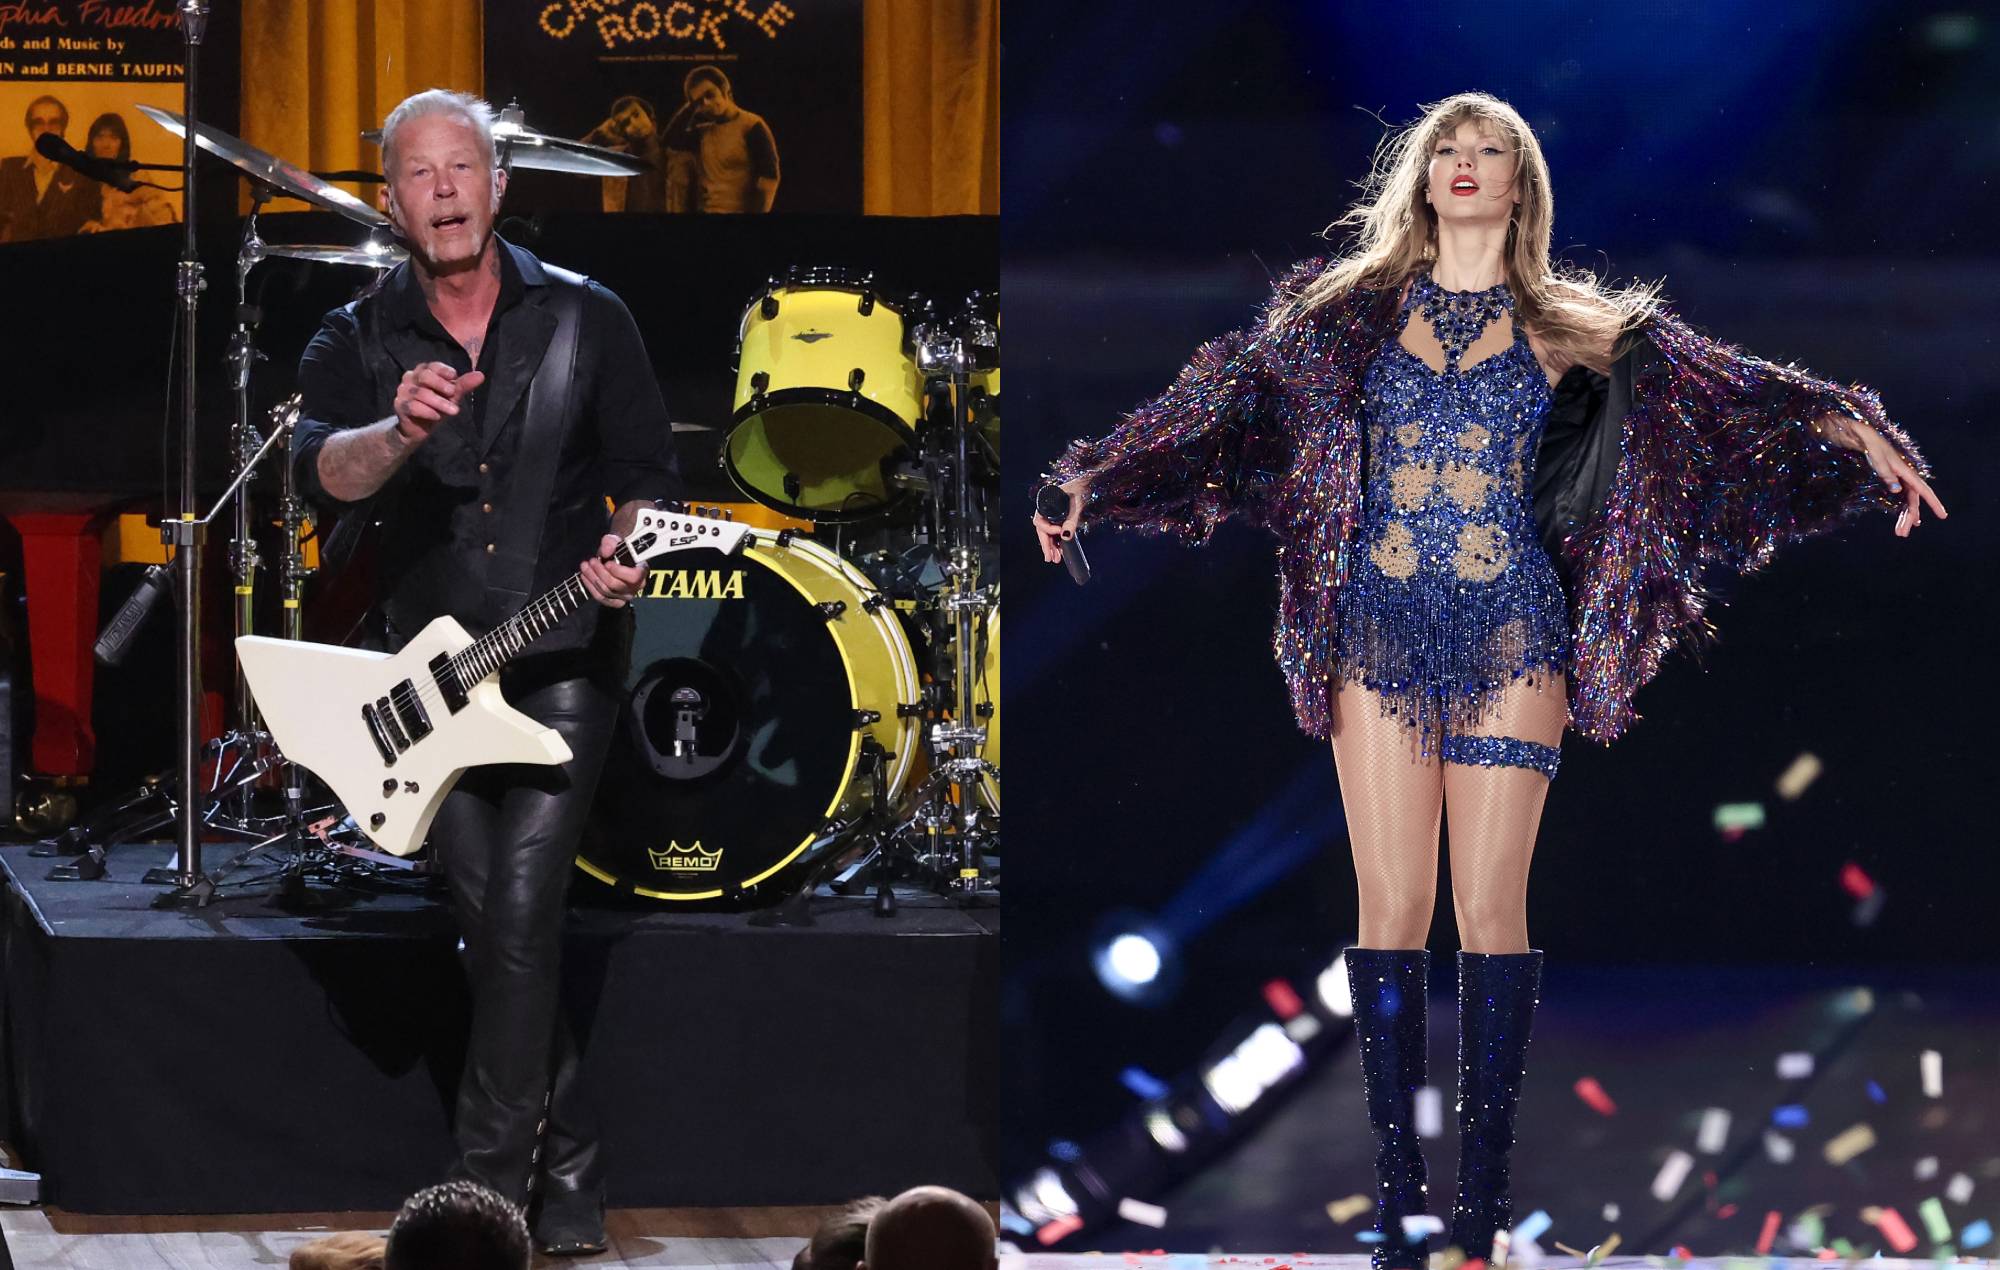 Judge quotes Taylor Swift in replying to Metallica insurance lawsuit